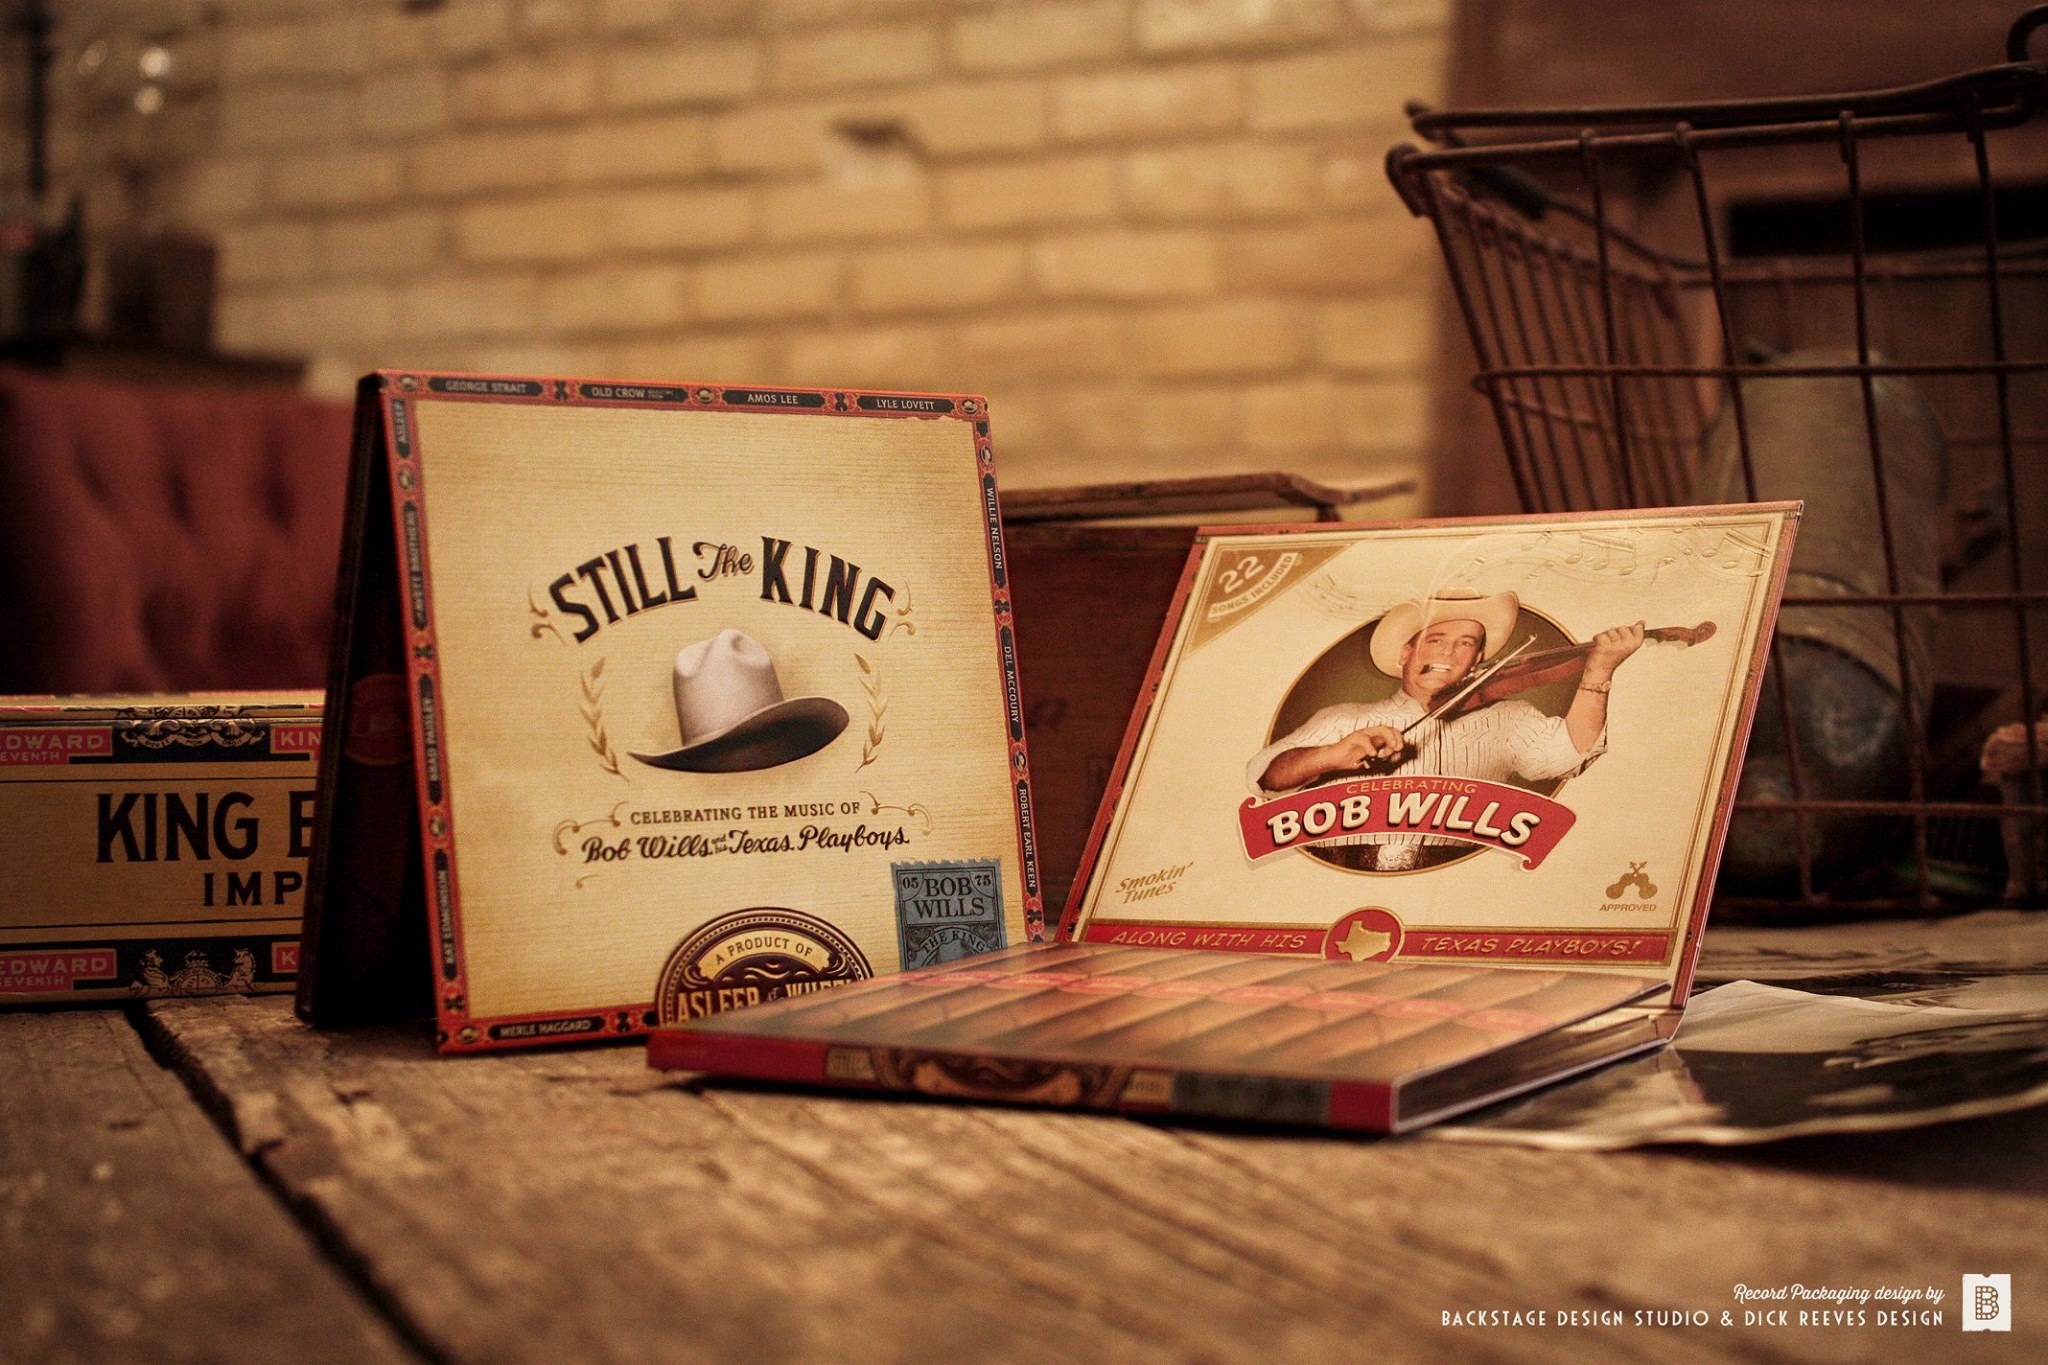 Still the King: Celebrating the Music of Bob Wills and His Texas Playboys / Asleep at the Wheel